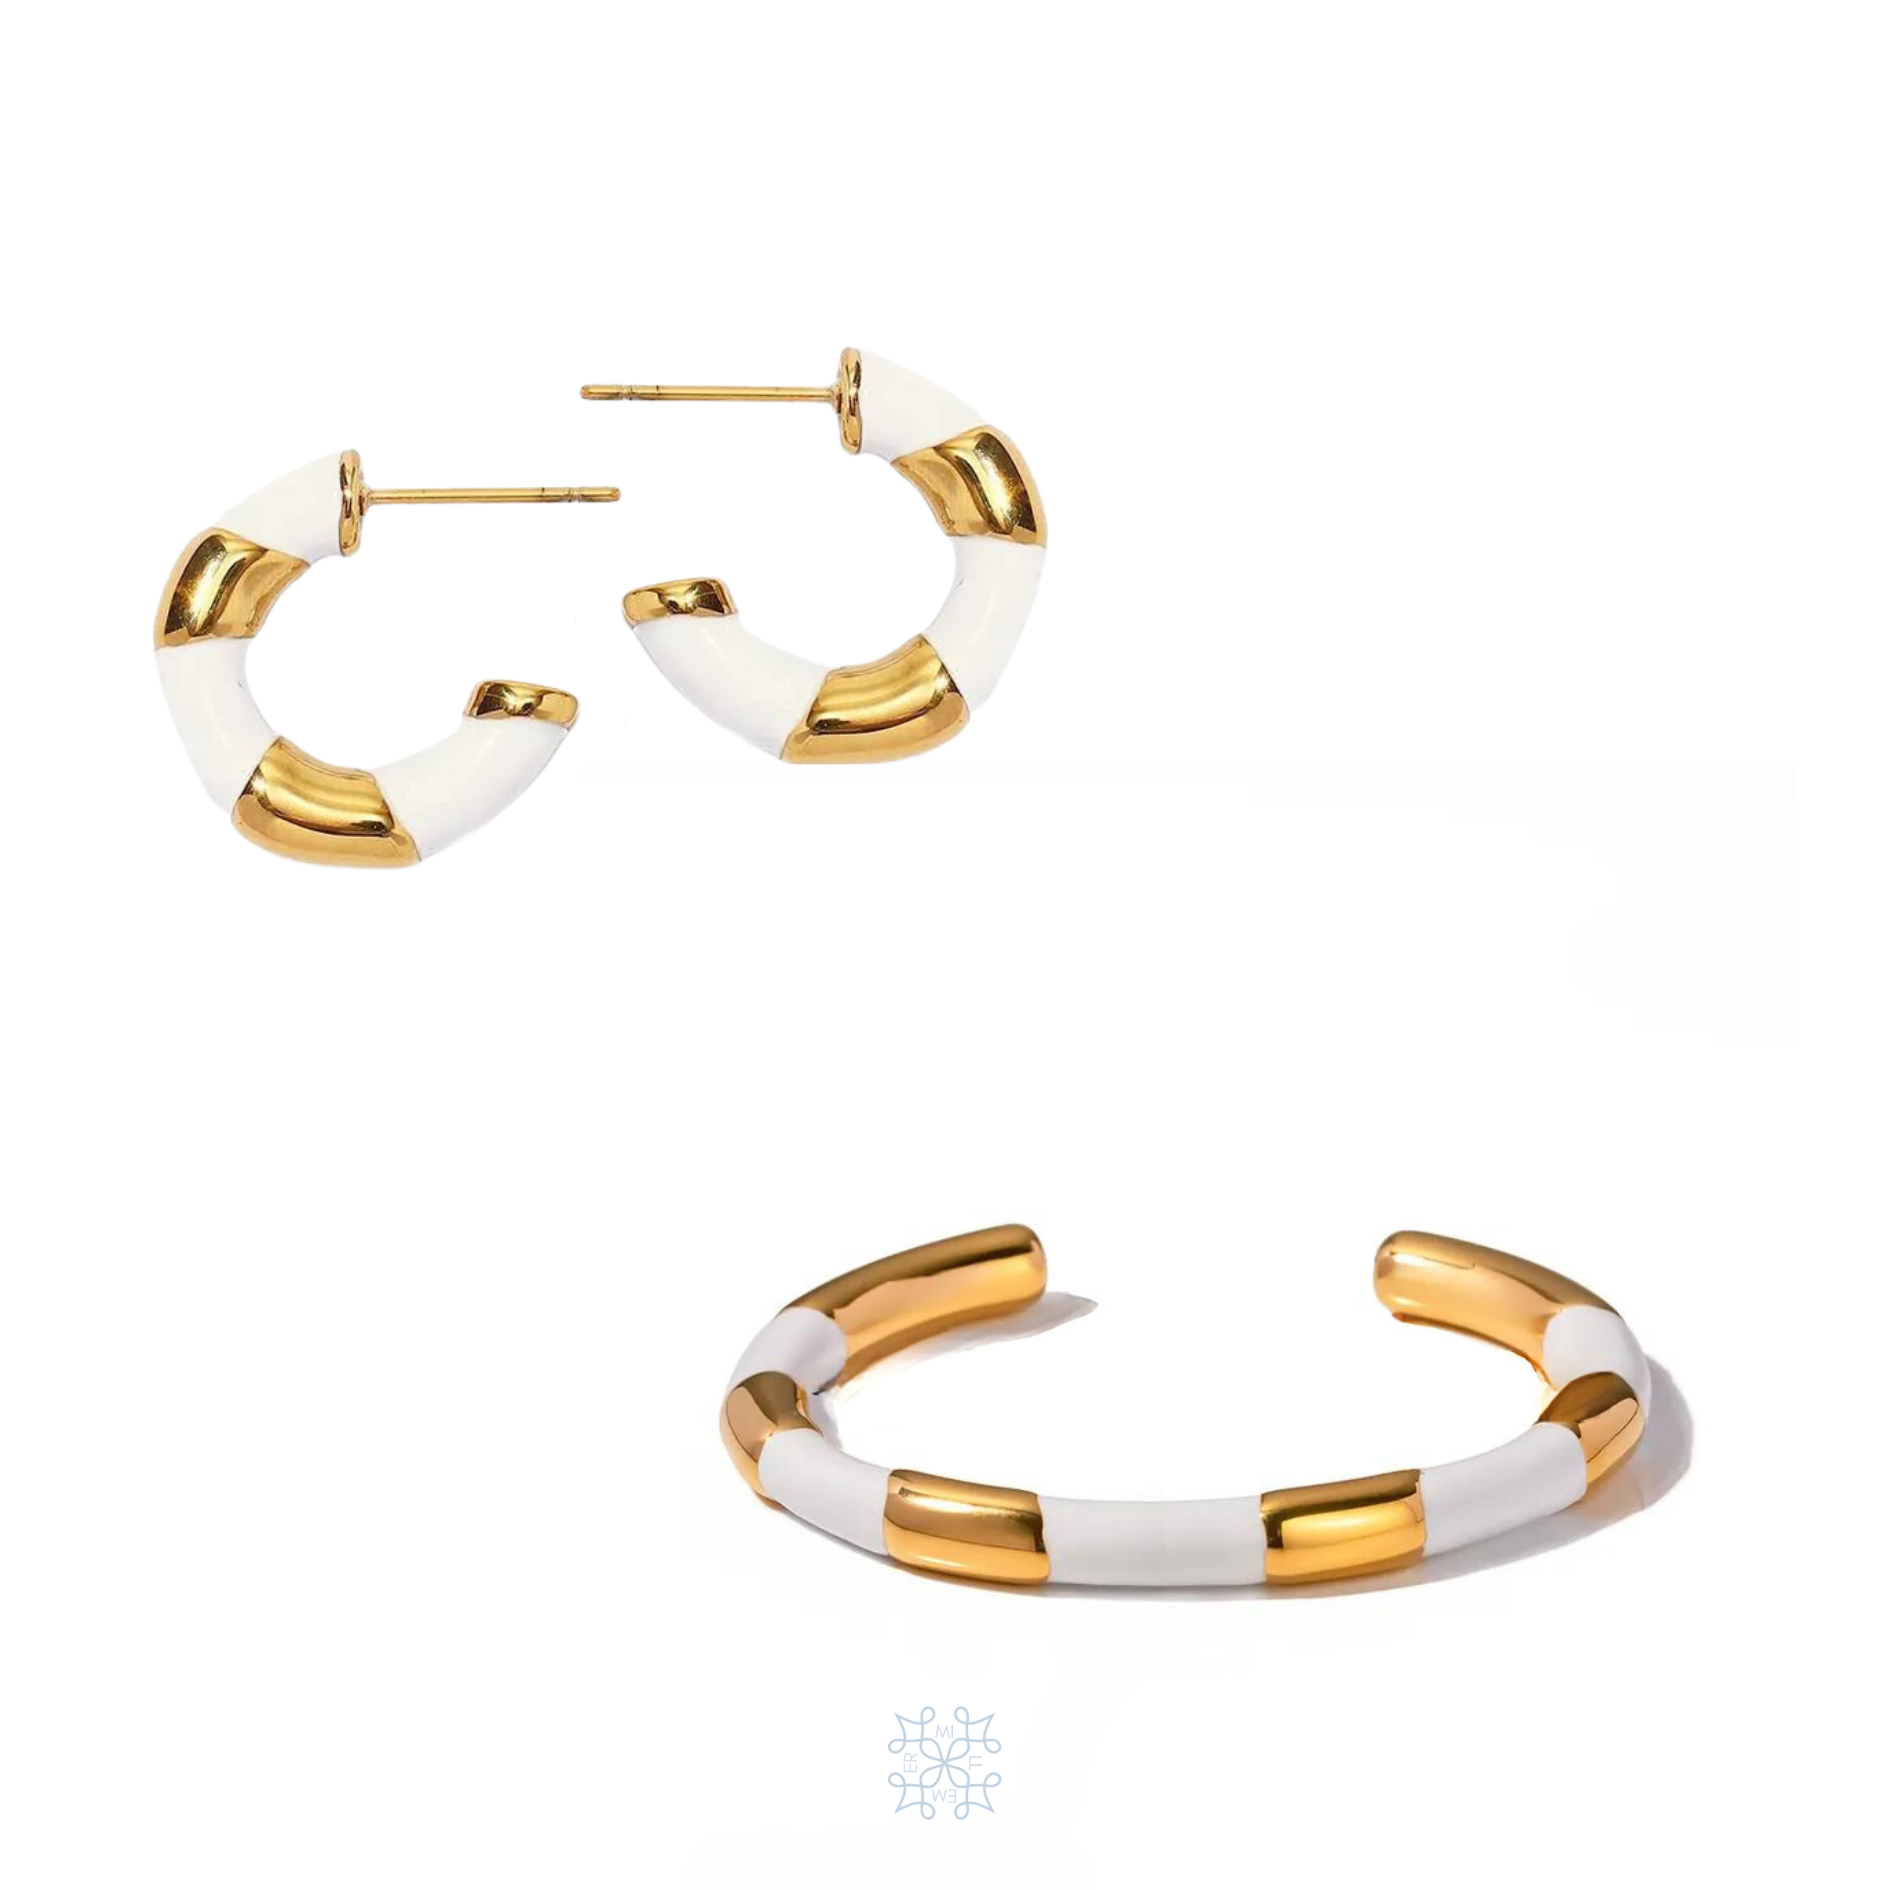 JEWELRY SET WITH PAIR OF HOOP EARRINGS AND A BANGLE BRACELET. BOTH PIECES ARE PAINTED IN WHITE ENAMEL CREATING THE SHAPE OF A RIBBON AROUND THE GOLD SURFACE.